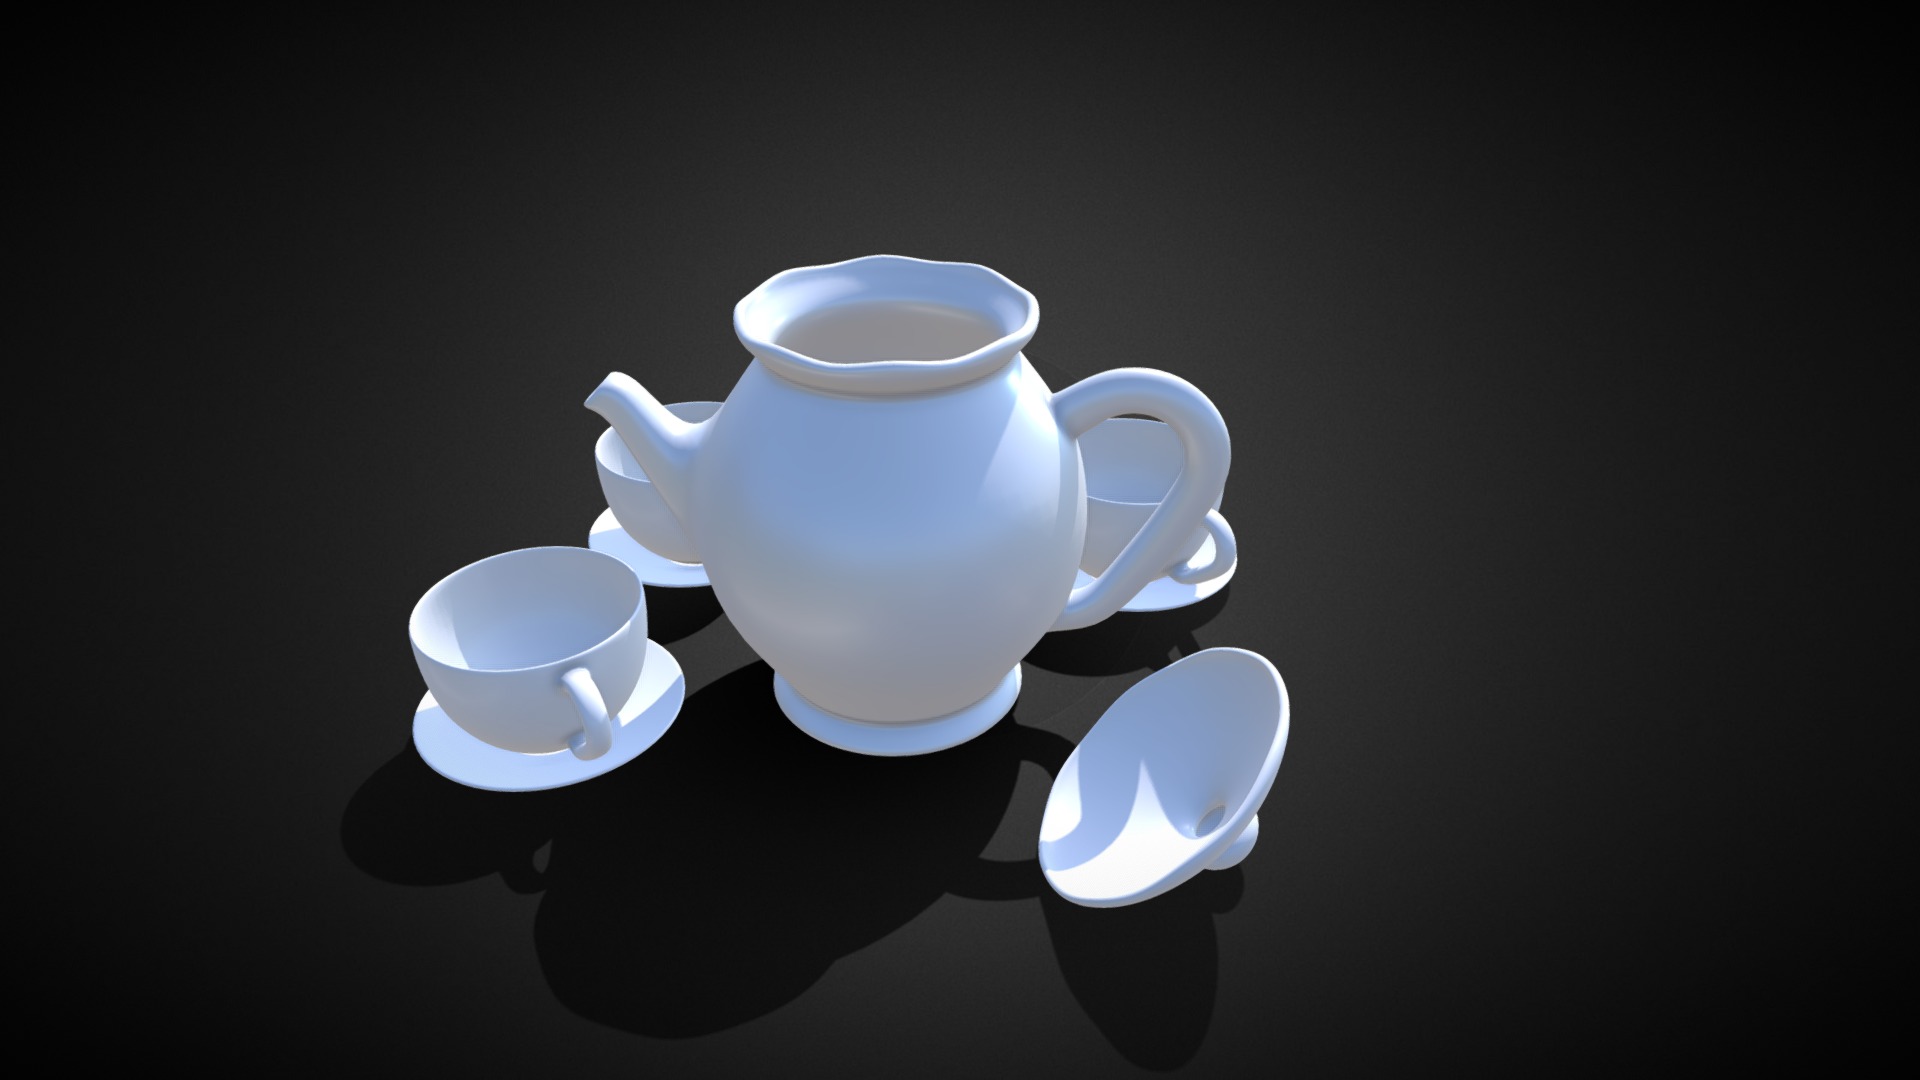 3D model Full Tea Pot Set - This is a 3D model of the Full Tea Pot Set. The 3D model is about a white teapot and two white cups on a black background.